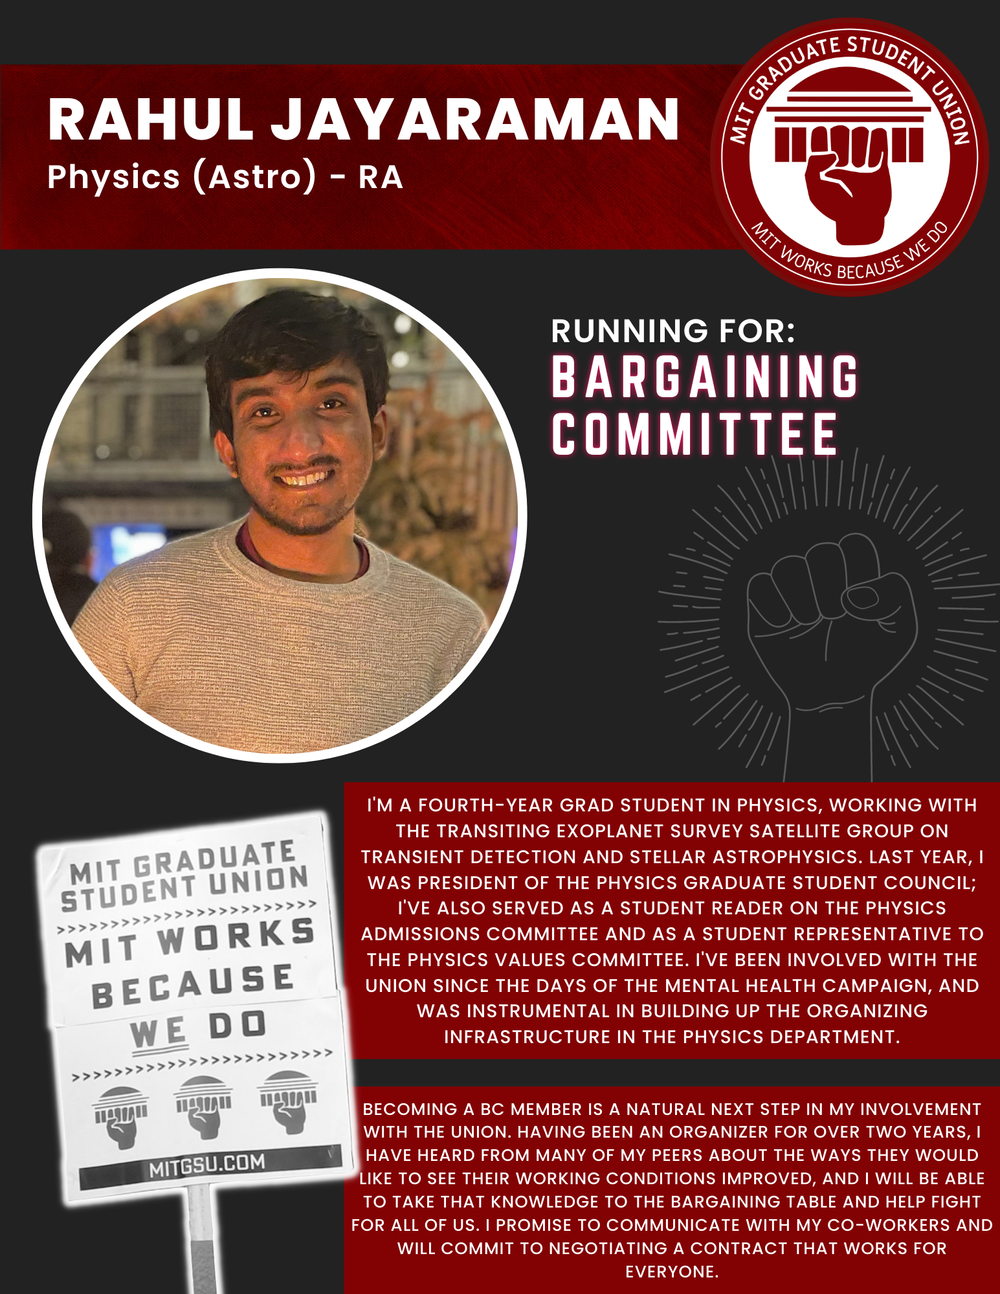  RAHUL JAYARAMAN Physics (Astro) - RA   RUNNING FOR: Bargaining Committee  I'M A FOURTH-YEAR GRAD STUDENT IN PHYSICS, WORKING WITH THE TRANSITING EXOPLANET SURVEY SATELLITE GROUP ON TRANSIENT DETECTION AND STELLAR ASTROPHYSICS. LAST YEAR, I WAS PRESI